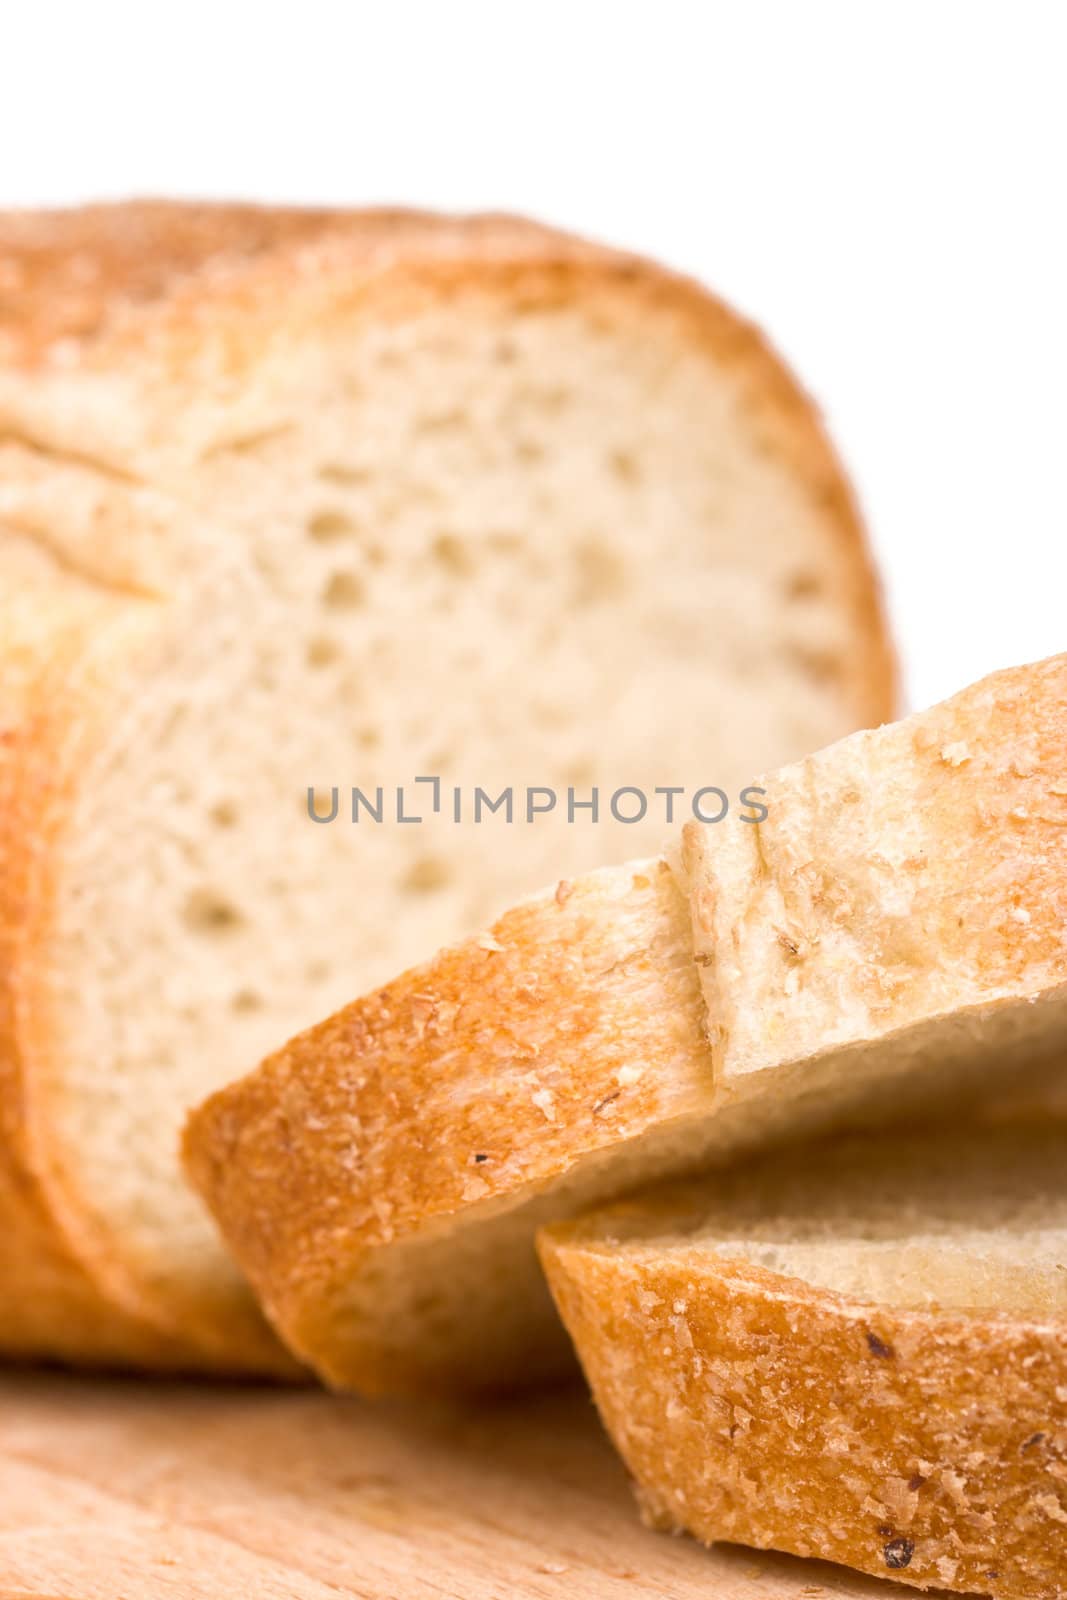 Sliced bread on wooden plate - shallow depth of field